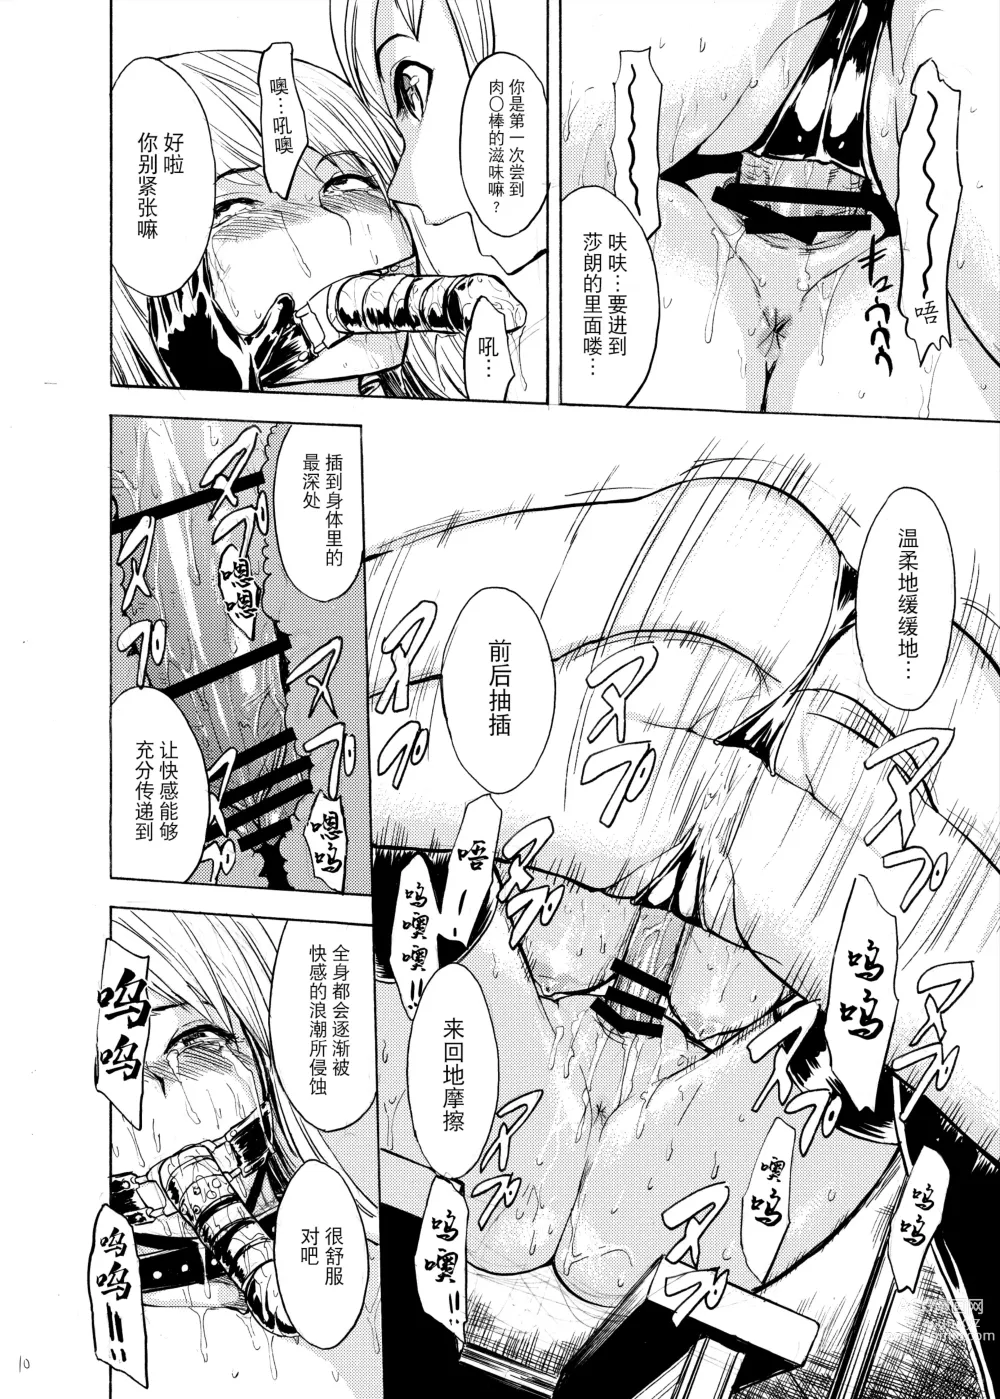 Page 10 of doujinshi  魔法学园的幕后 献祭者育成计划